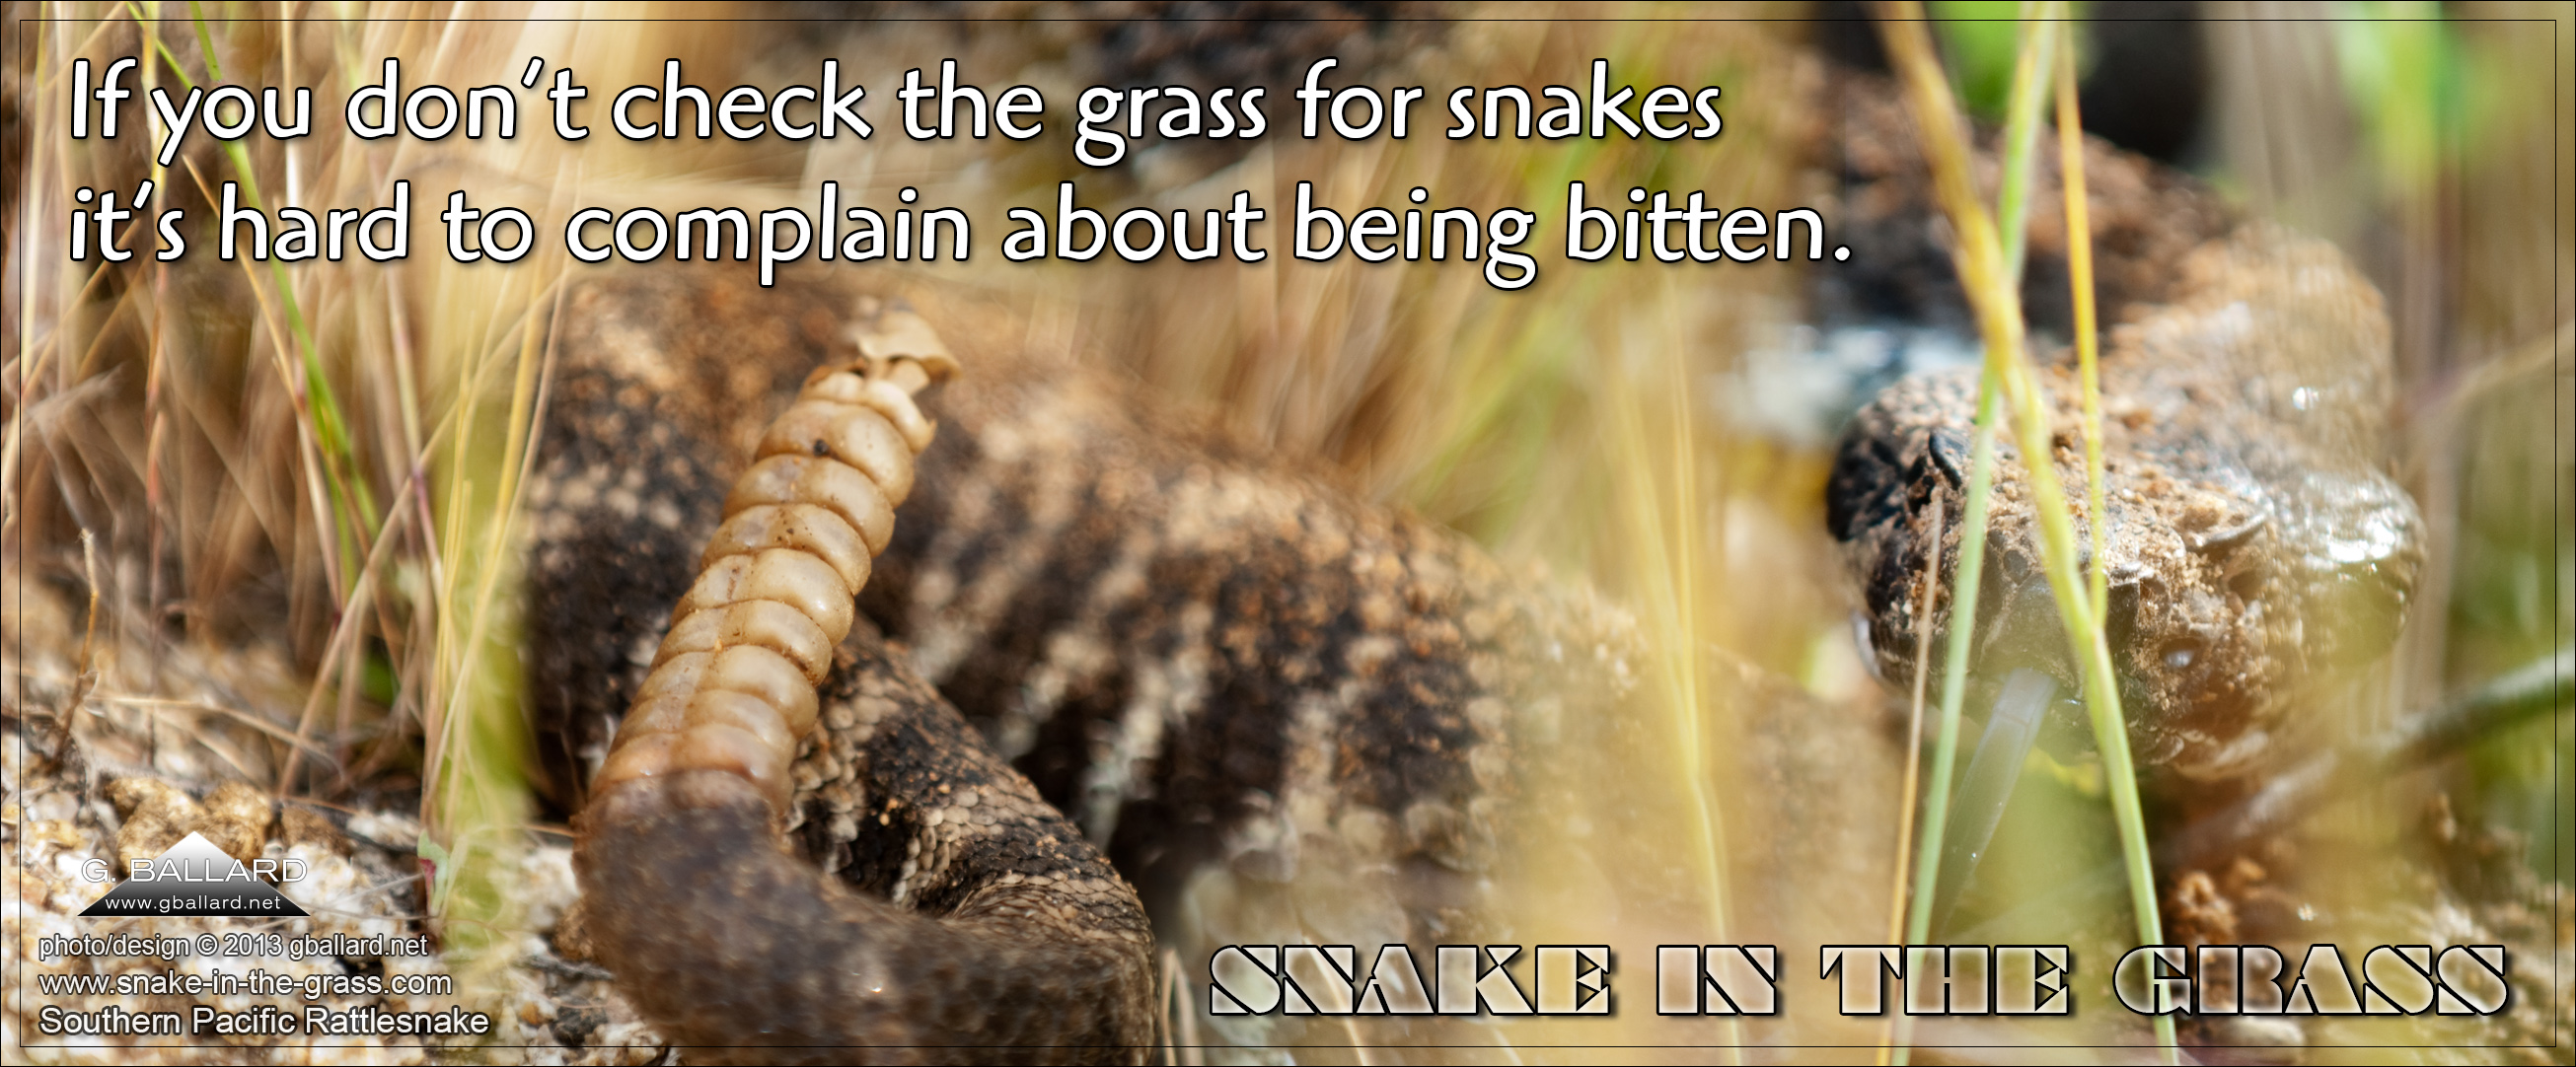 Funny Quotes About Snakes. QuotesGram